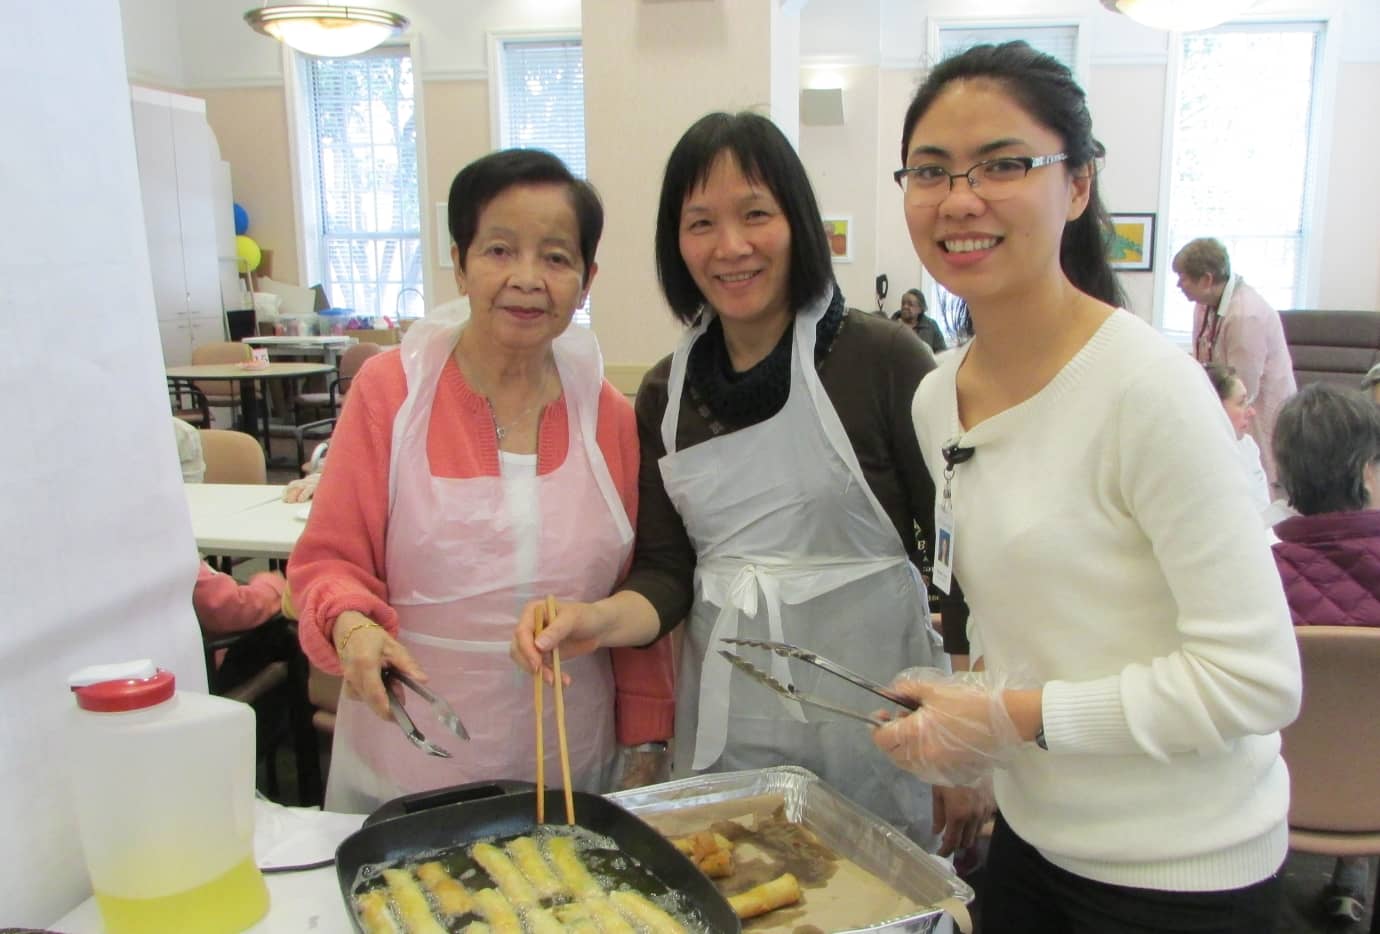 OnLok staff cooking eggrolls for the elderly patients during a saturday service